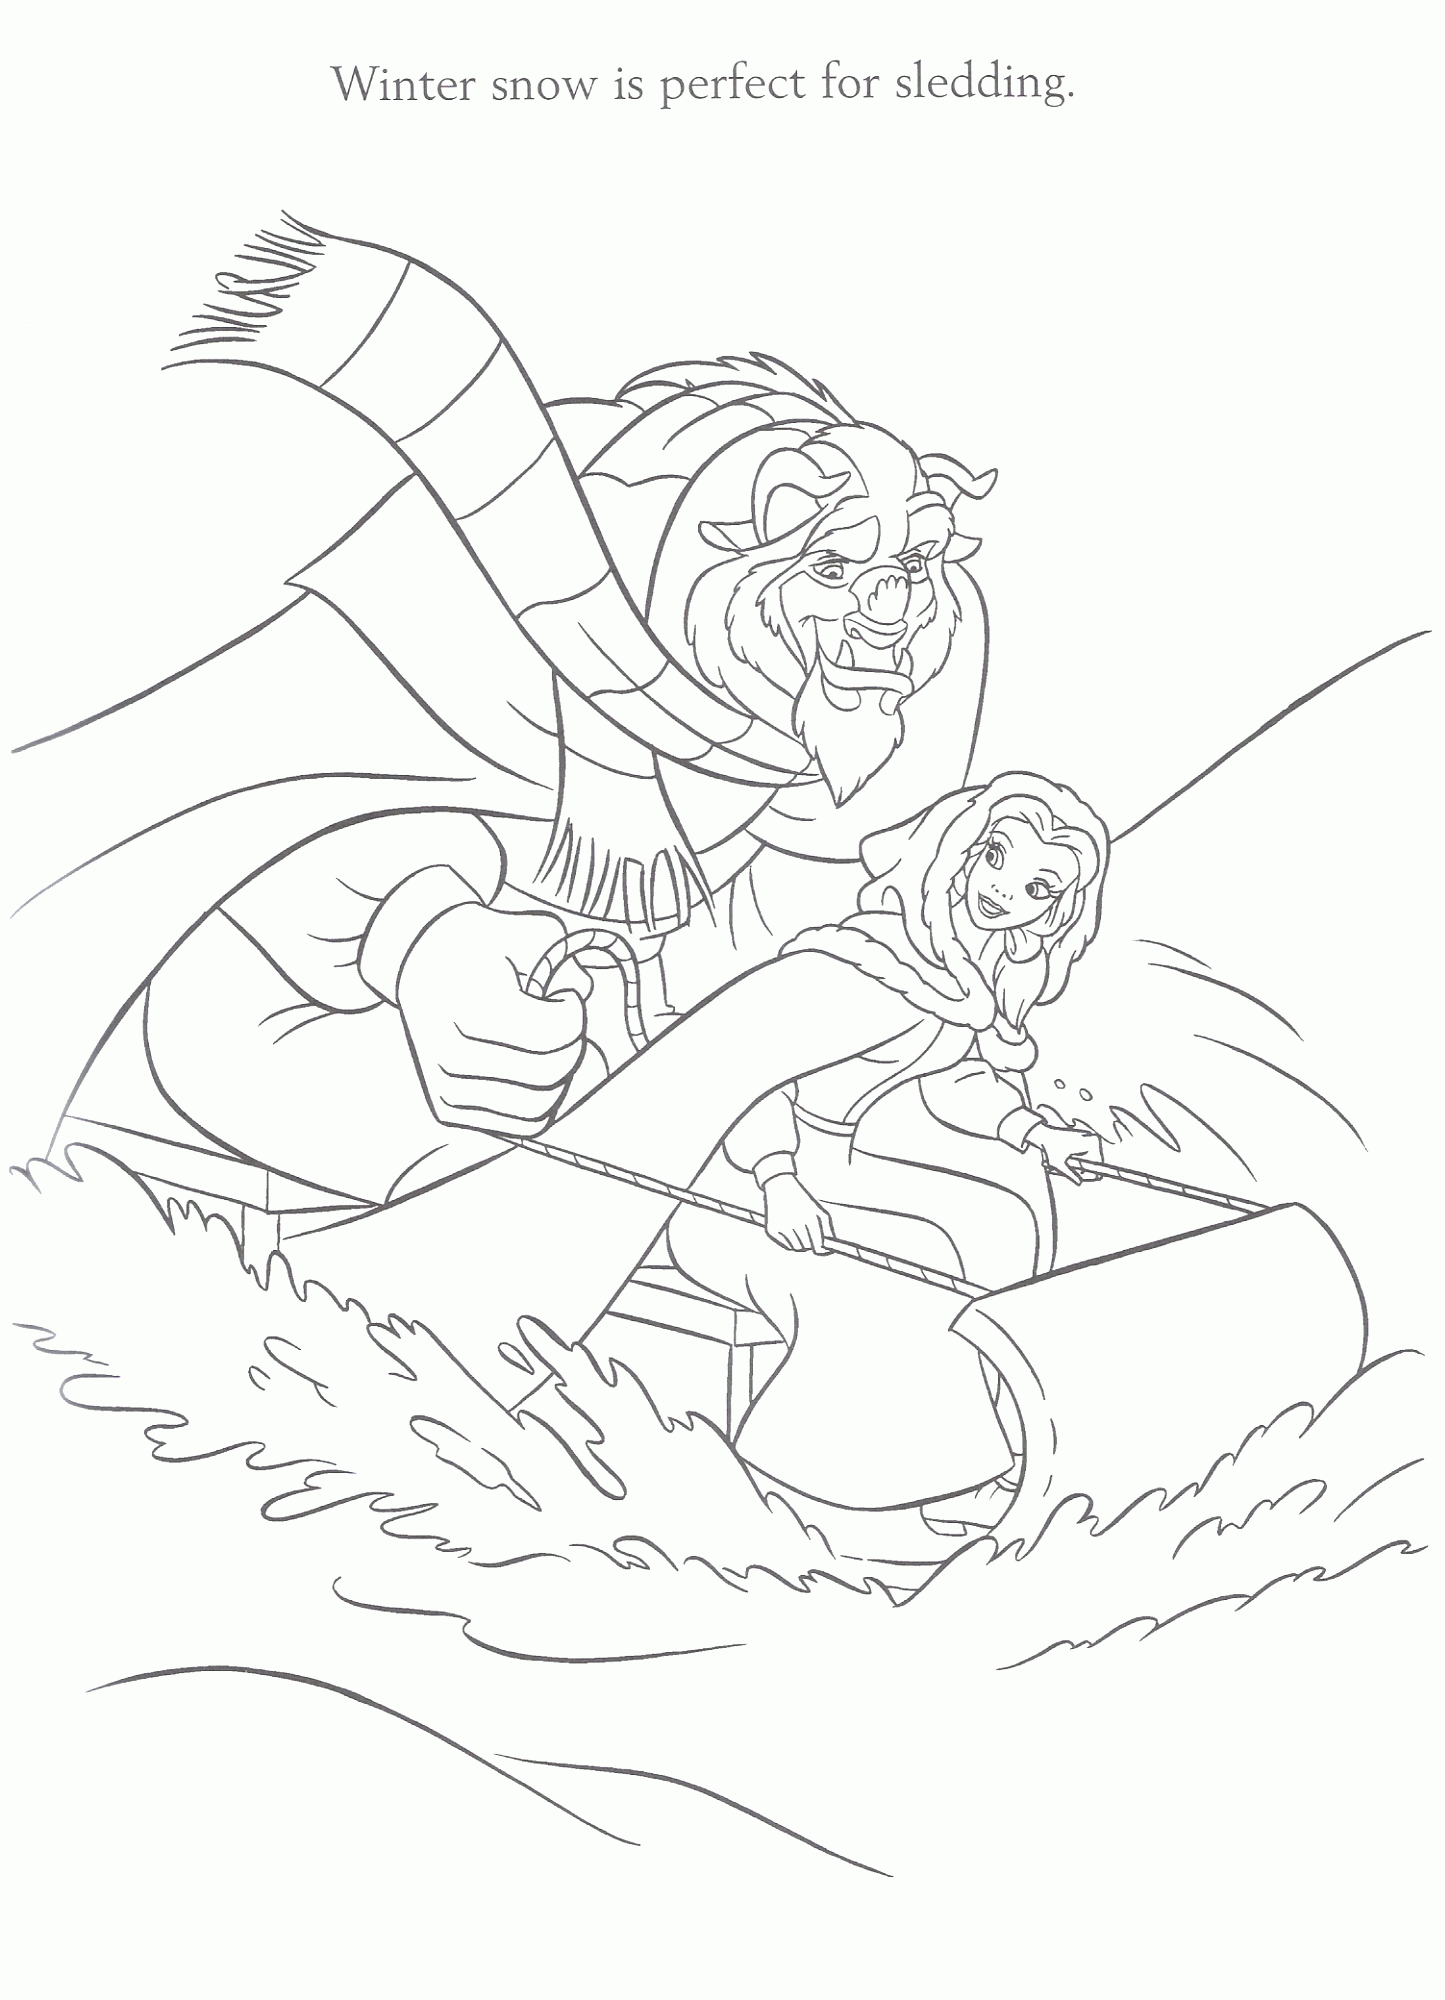 Disney Princess Winter Coloring Pages - High Quality Coloring Pages